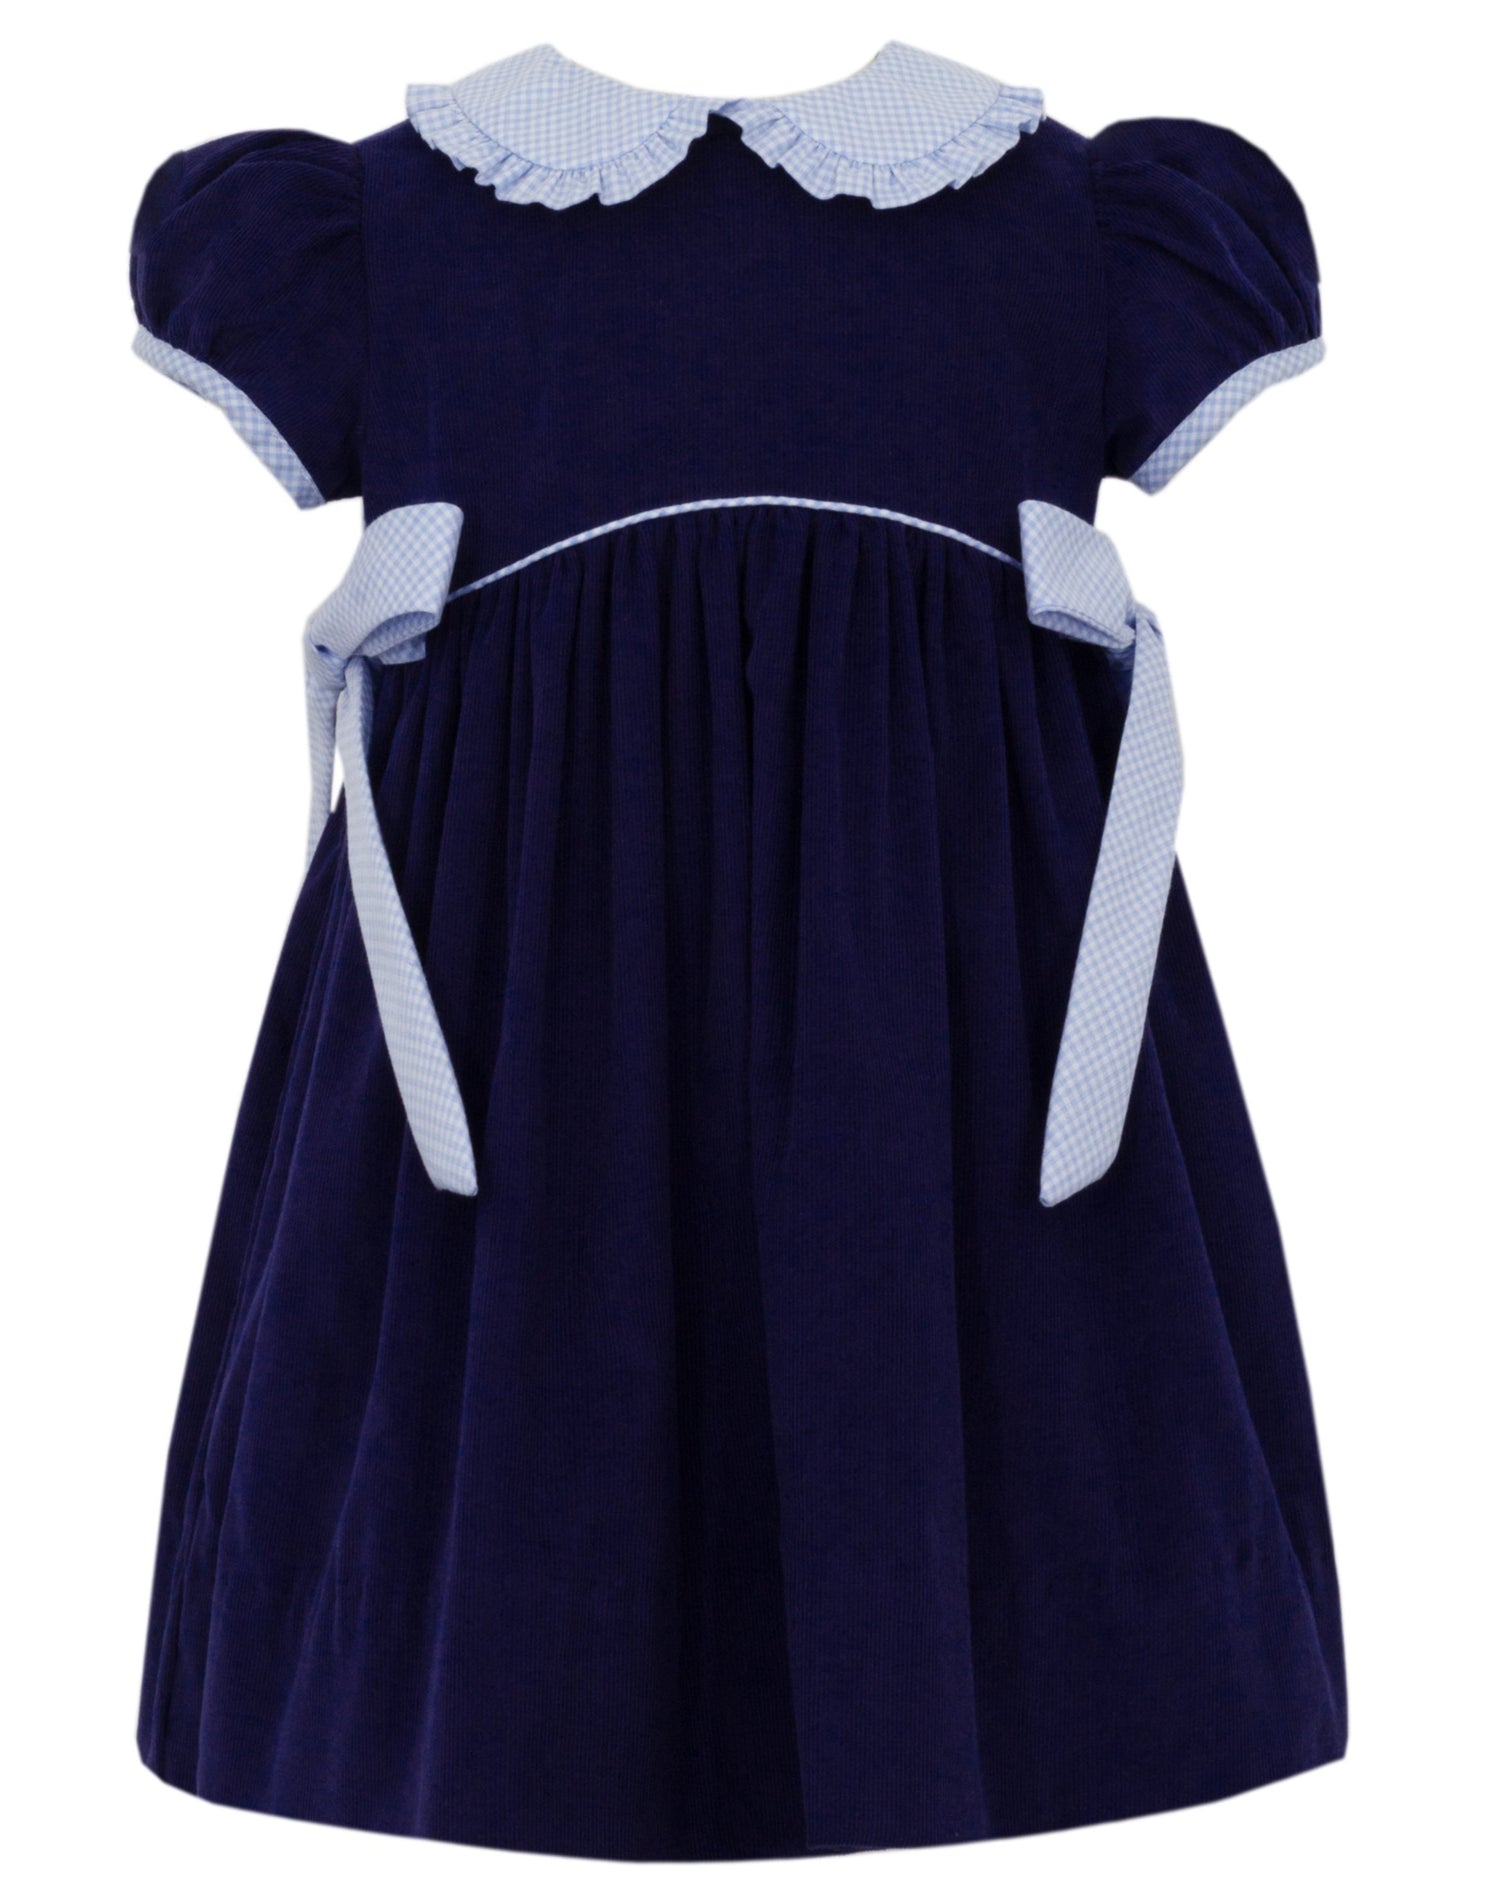 Nave Blue Cord Gingham Dress